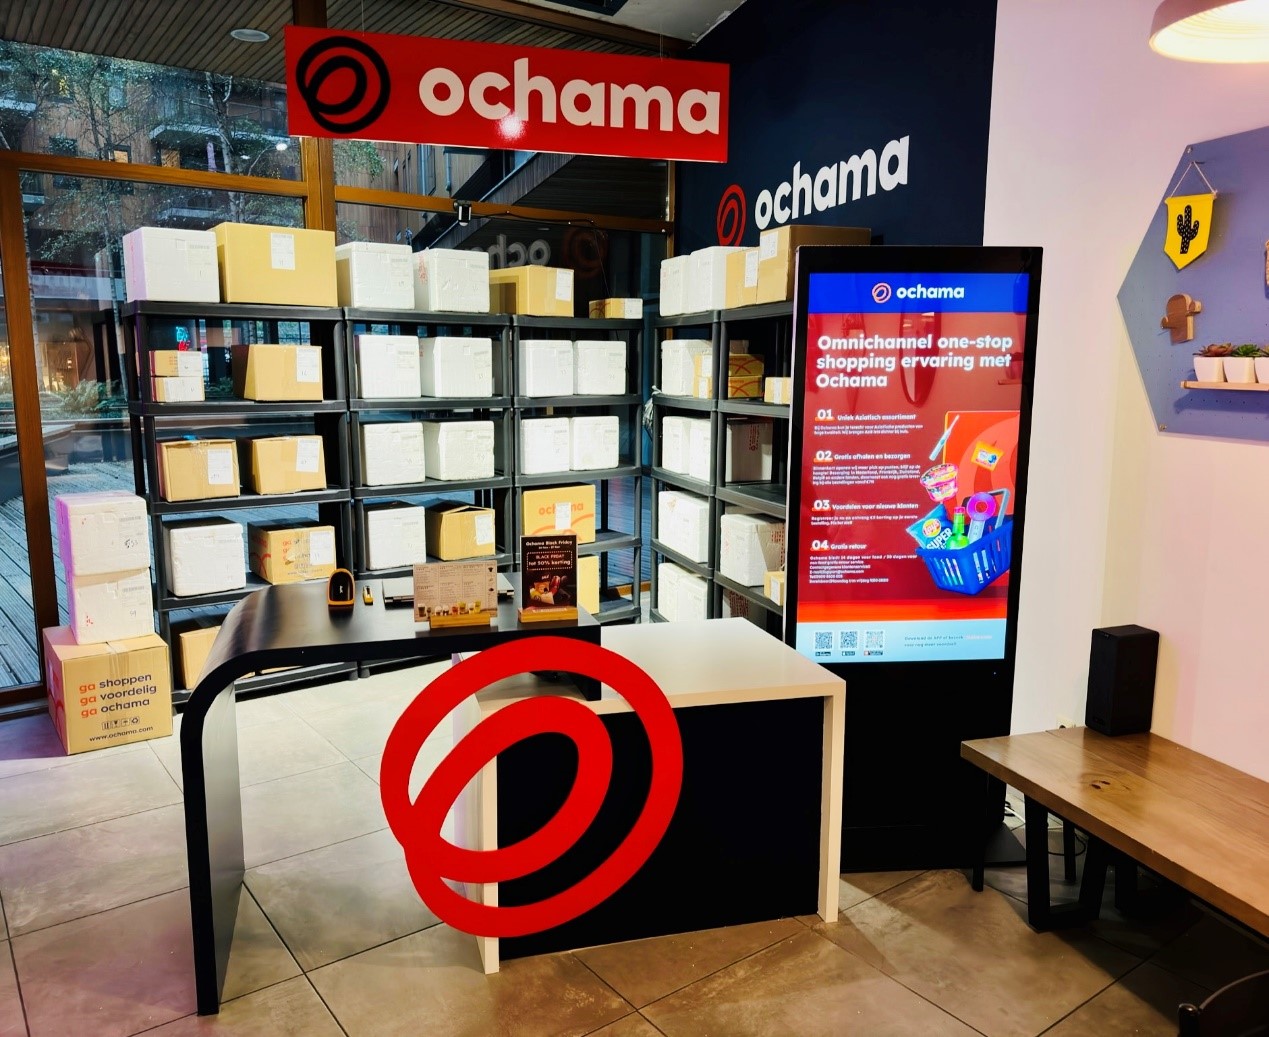 JD.com’s Ochama Expands Pick Up Points to 120+ with Physical Stores in Europe